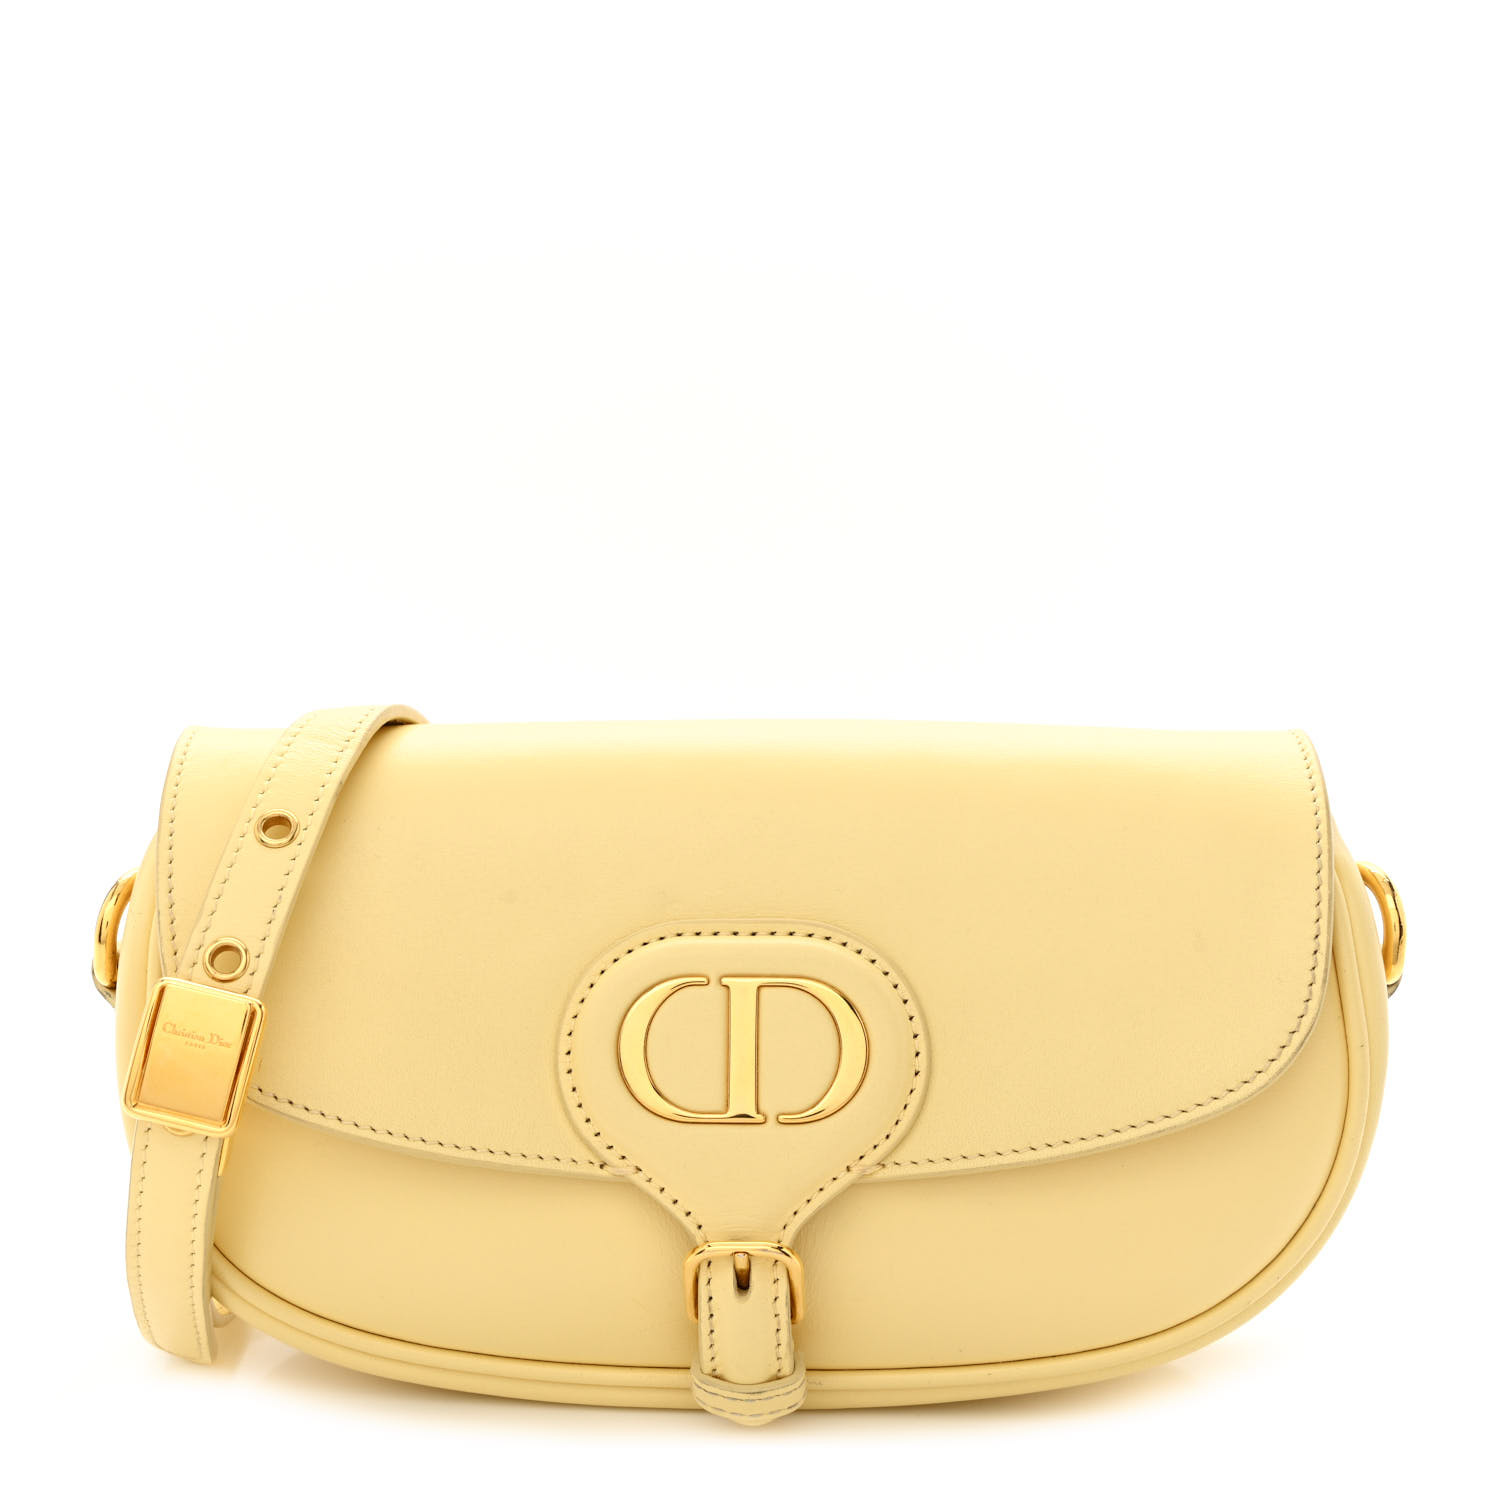 CHRISTIAN DIOR Box Calfskin East West Bobby Bag in the color Pale Yellow by FASHIONPHILE